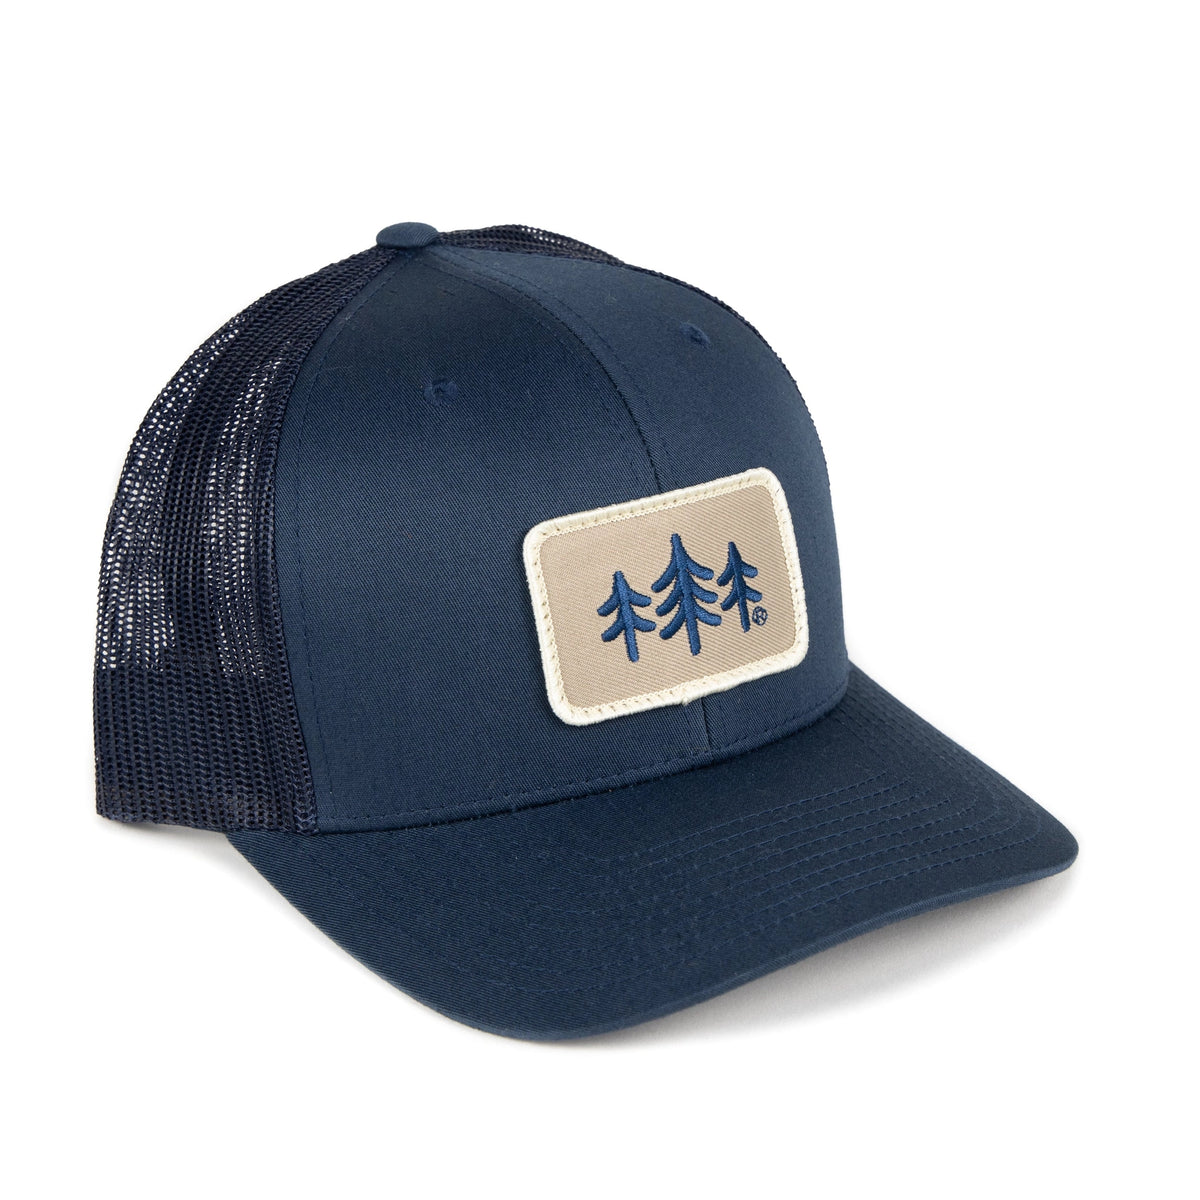 INTO THE PINES PATCH HAT, NAVY